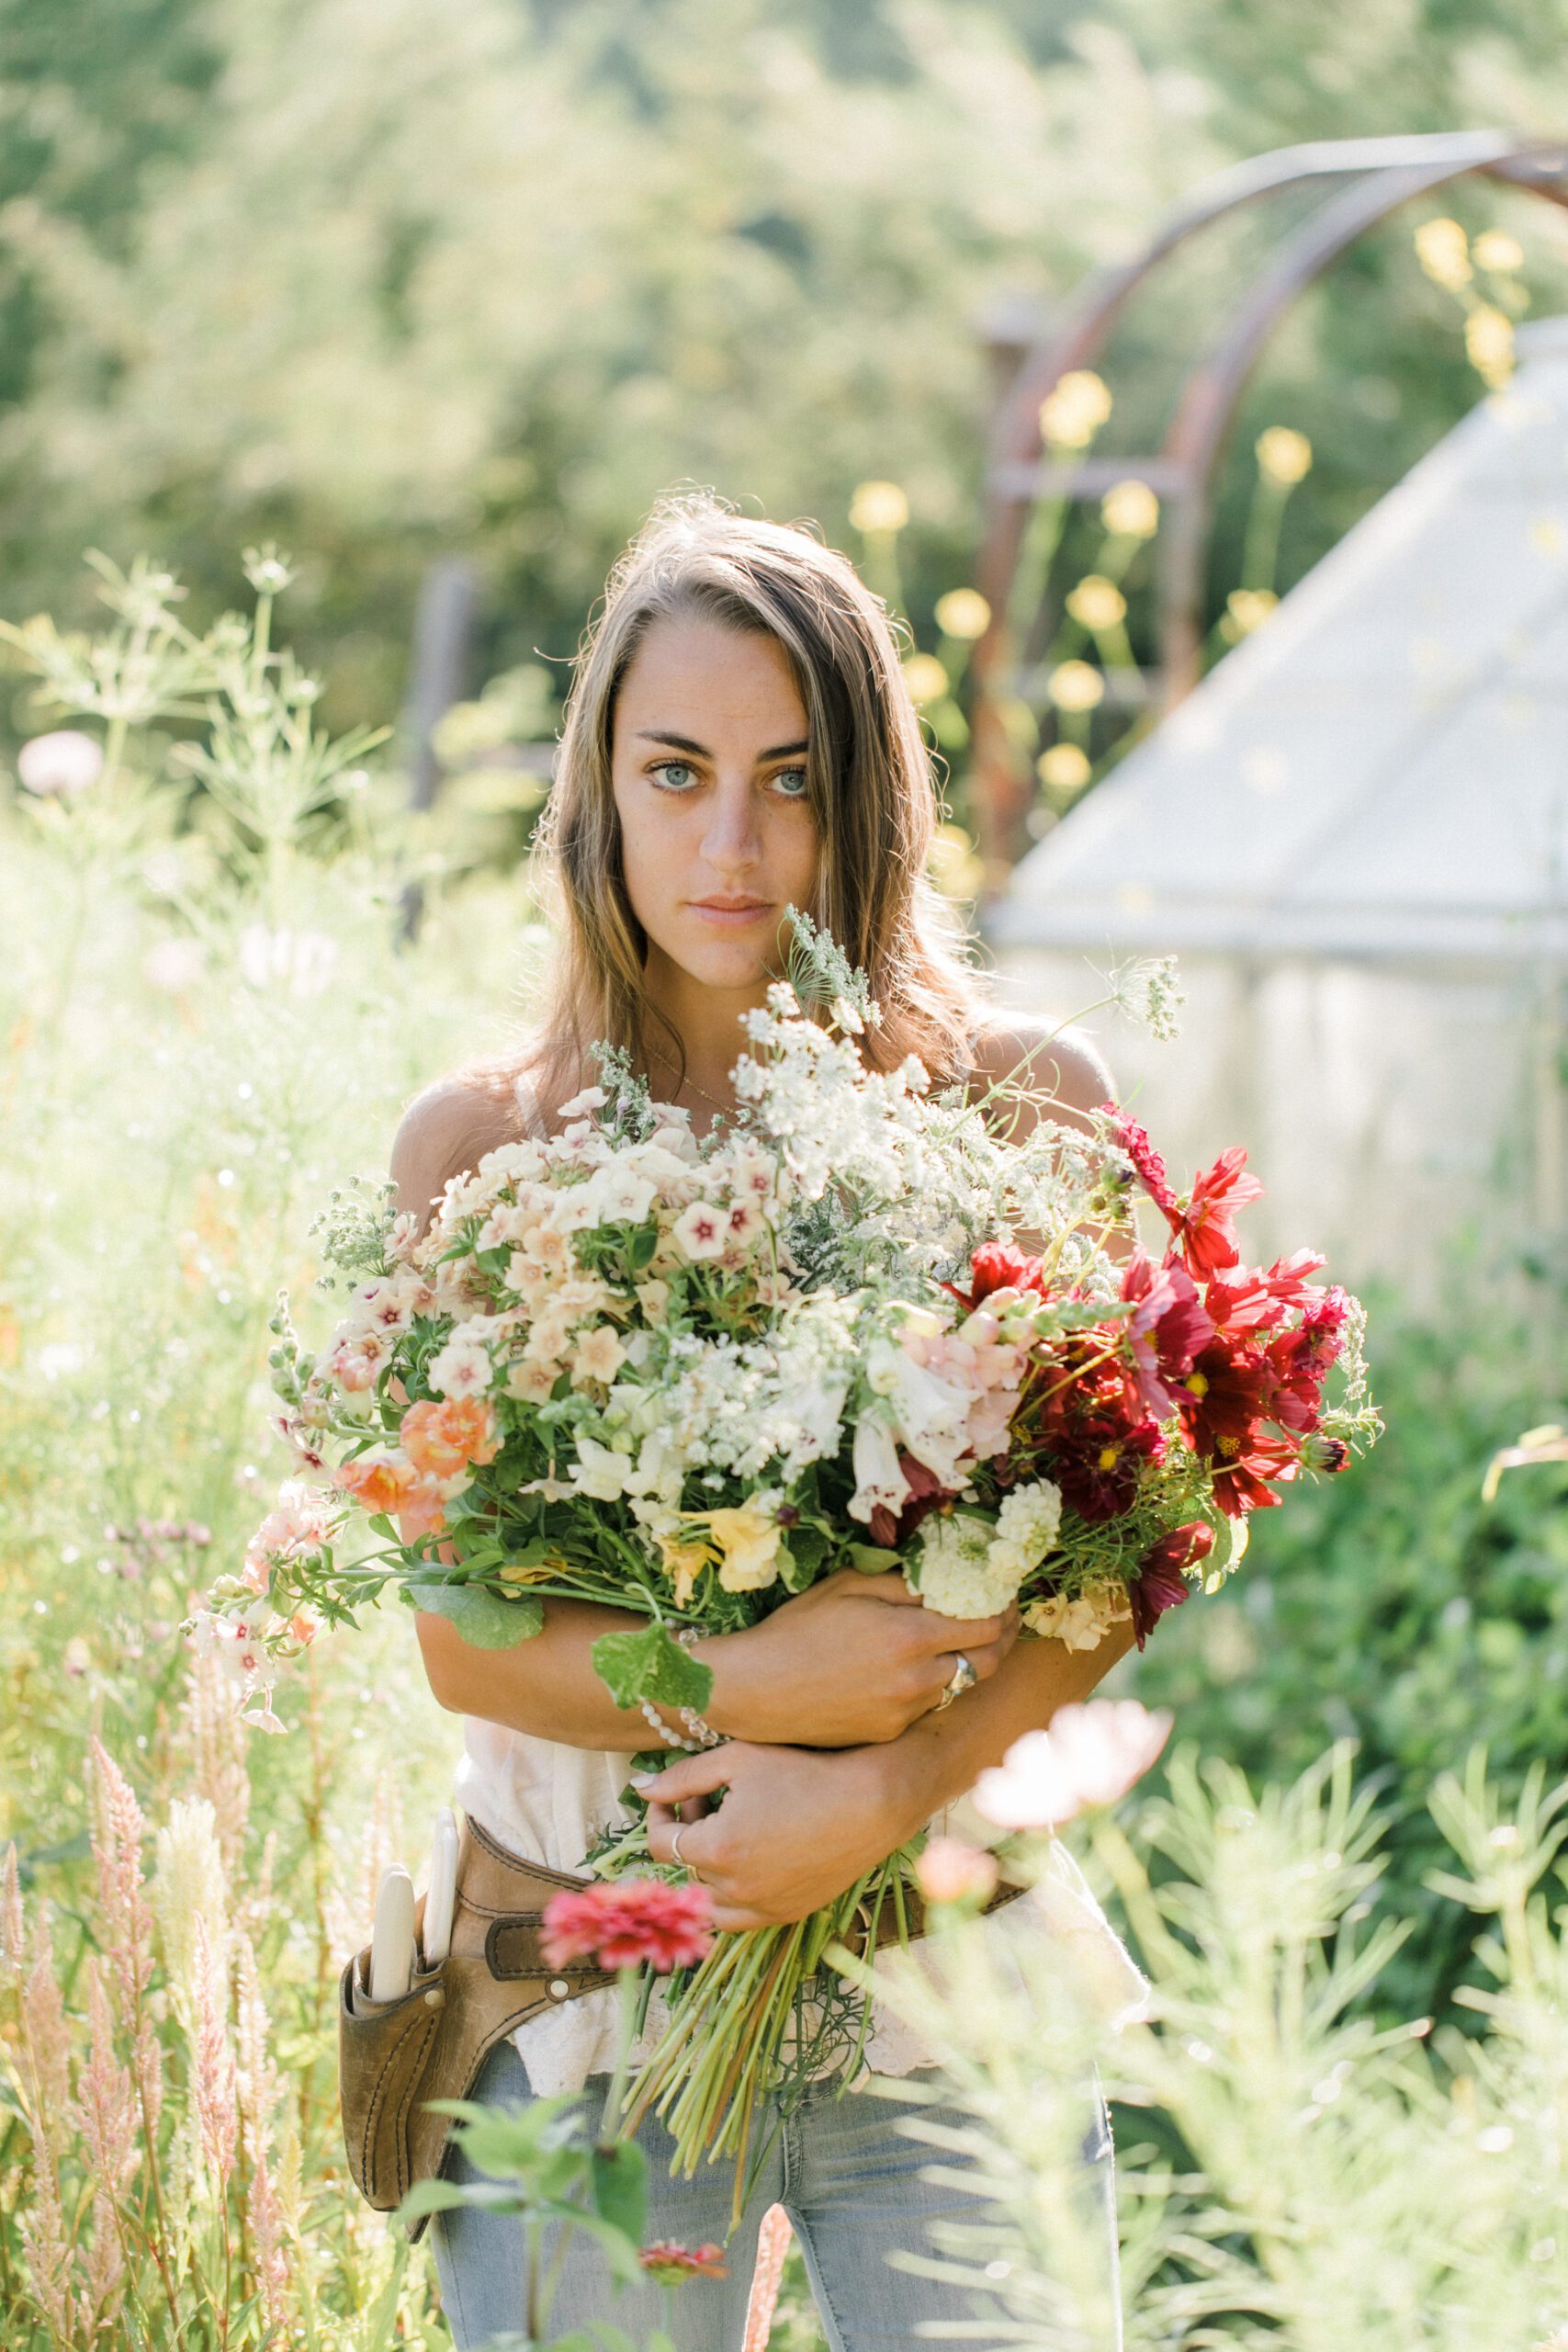 A women poses holding flowers in a garden for individual business photography